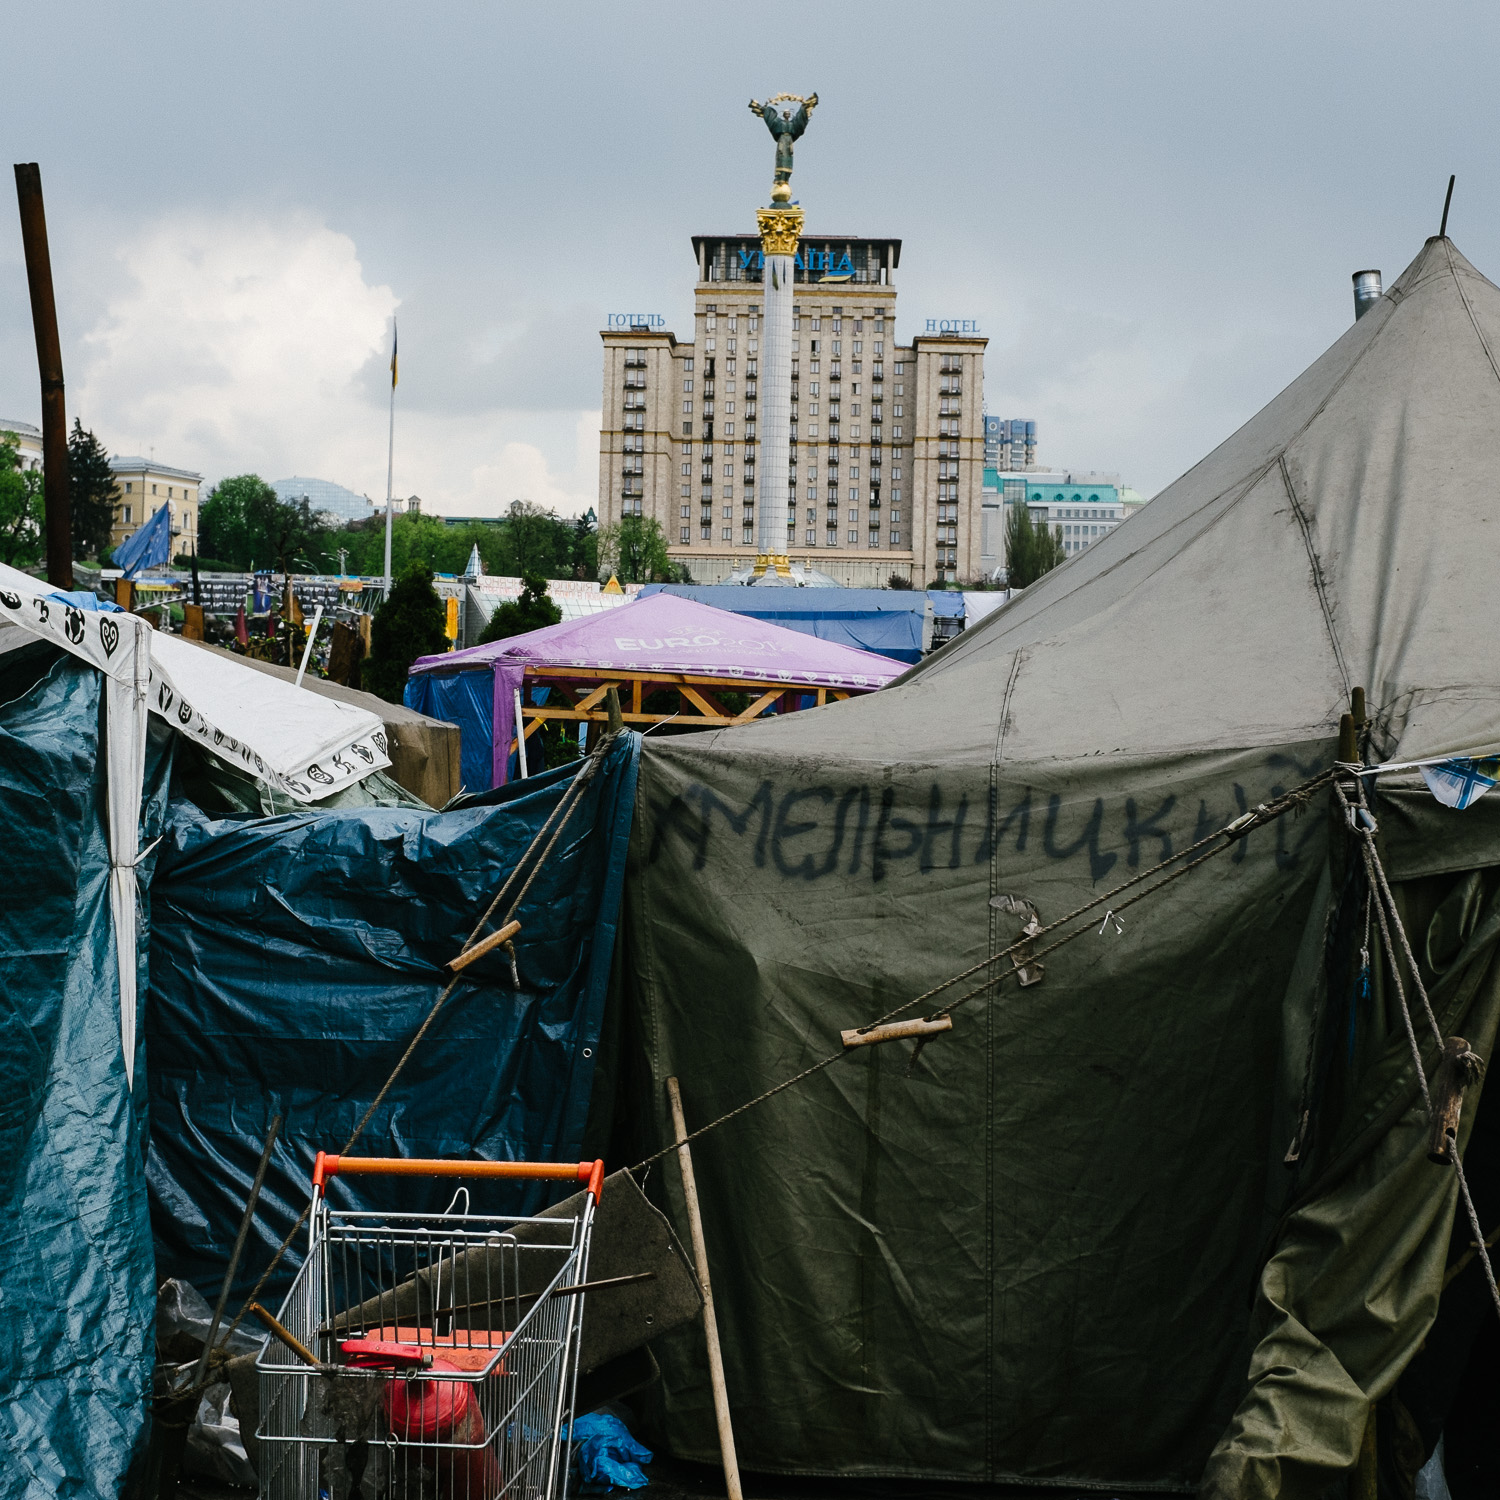  A tent marked with the word ‘Khmelnytskyi’, after a town in west-central Ukraine, pitched on Independence Square, Kyiv, in April 2014. Those joining the 'Euromaidan' uprising often organised themselves into groups based around their home towns and c